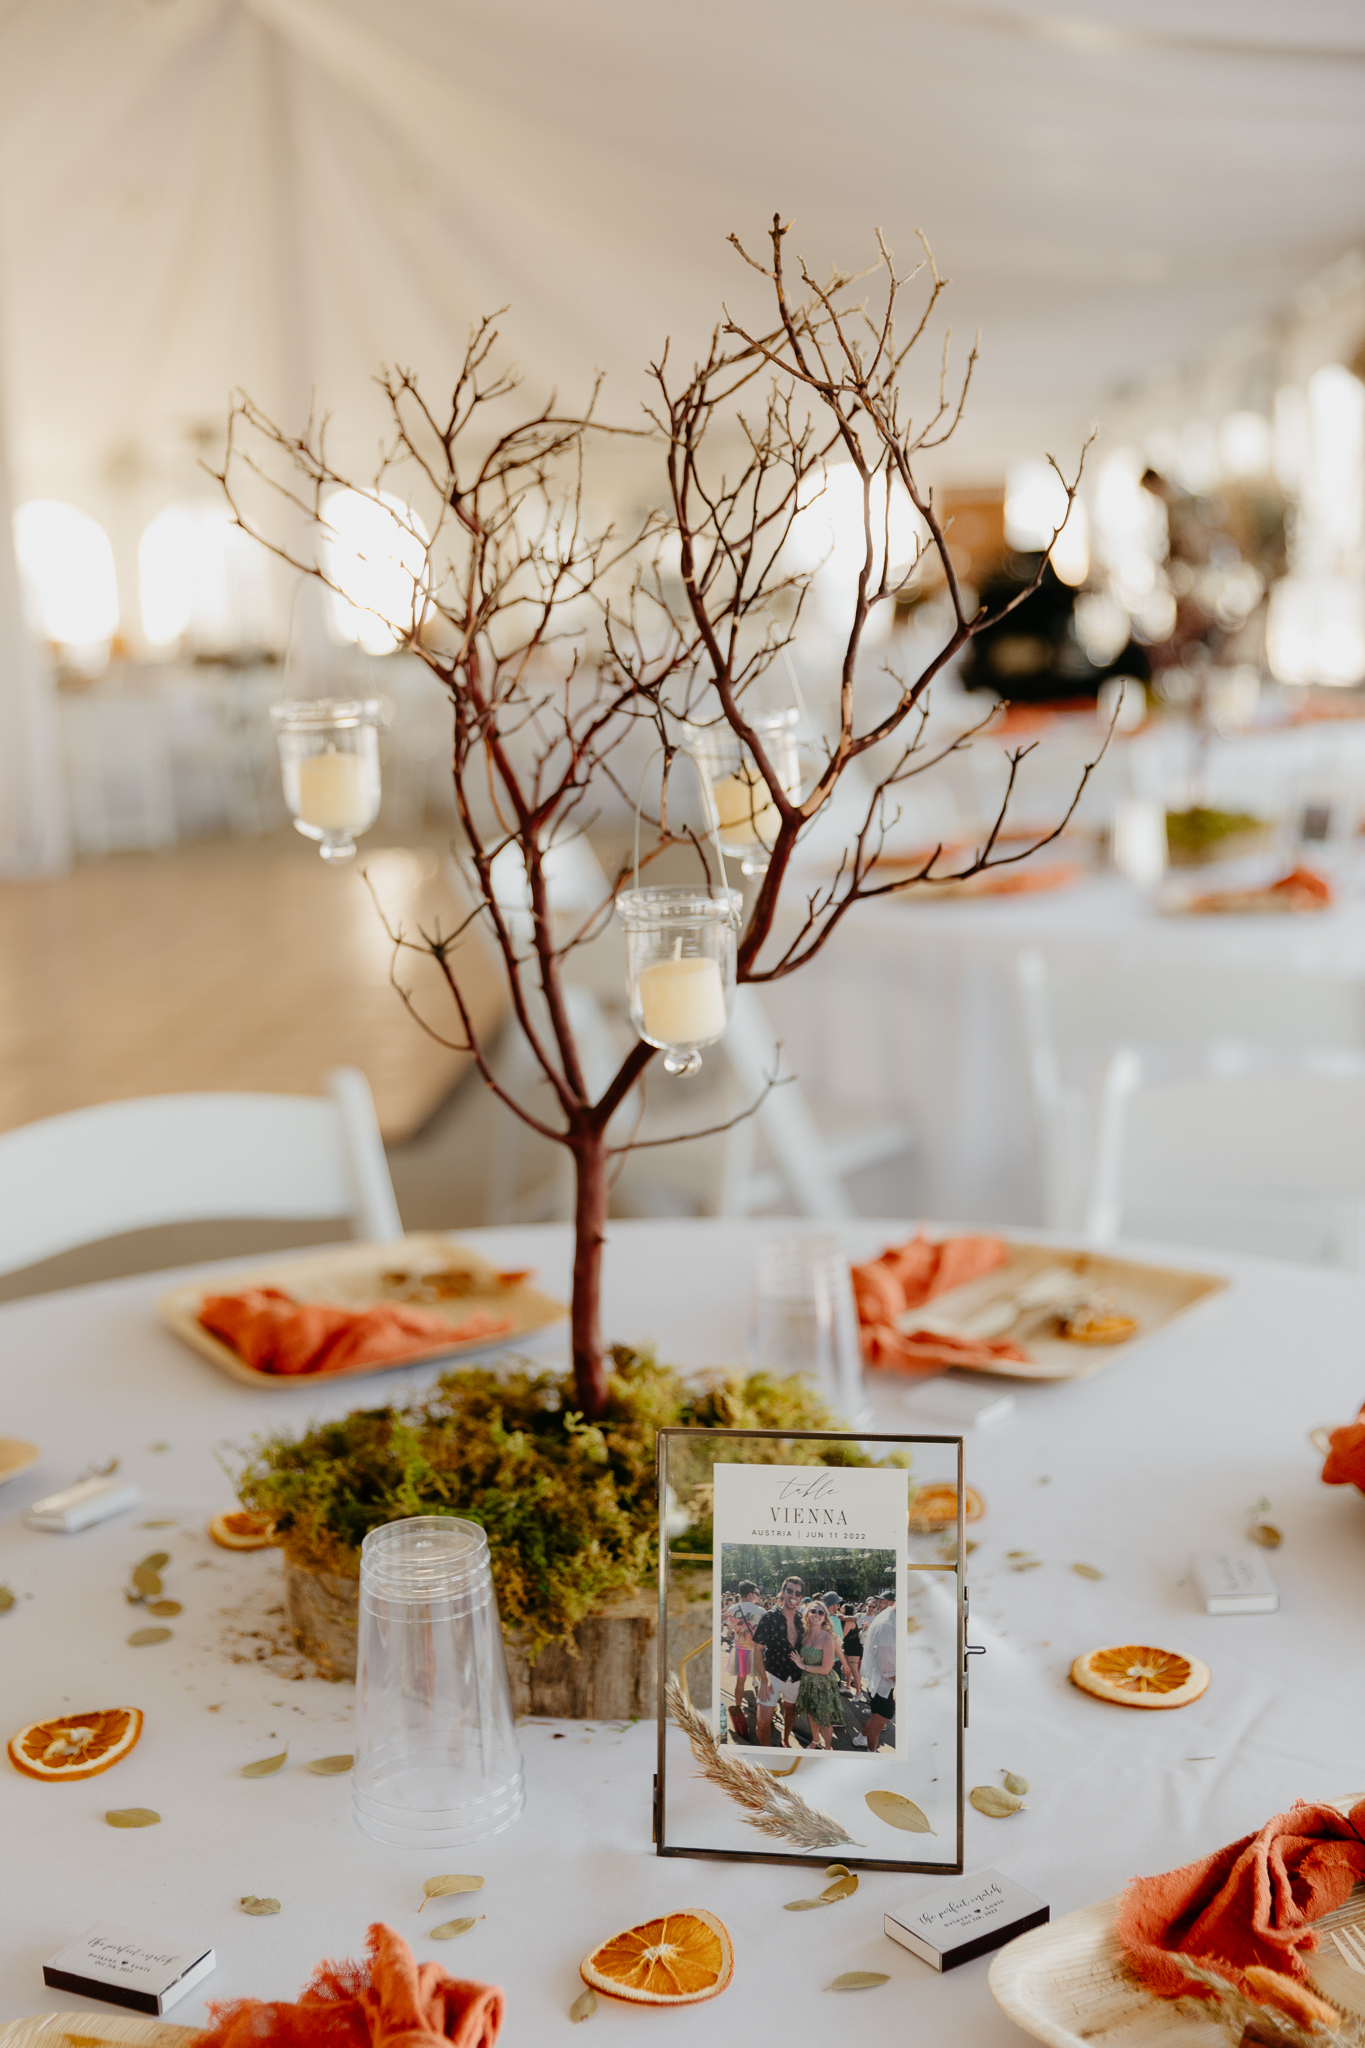 Wedding decorations and tables in a large white tent